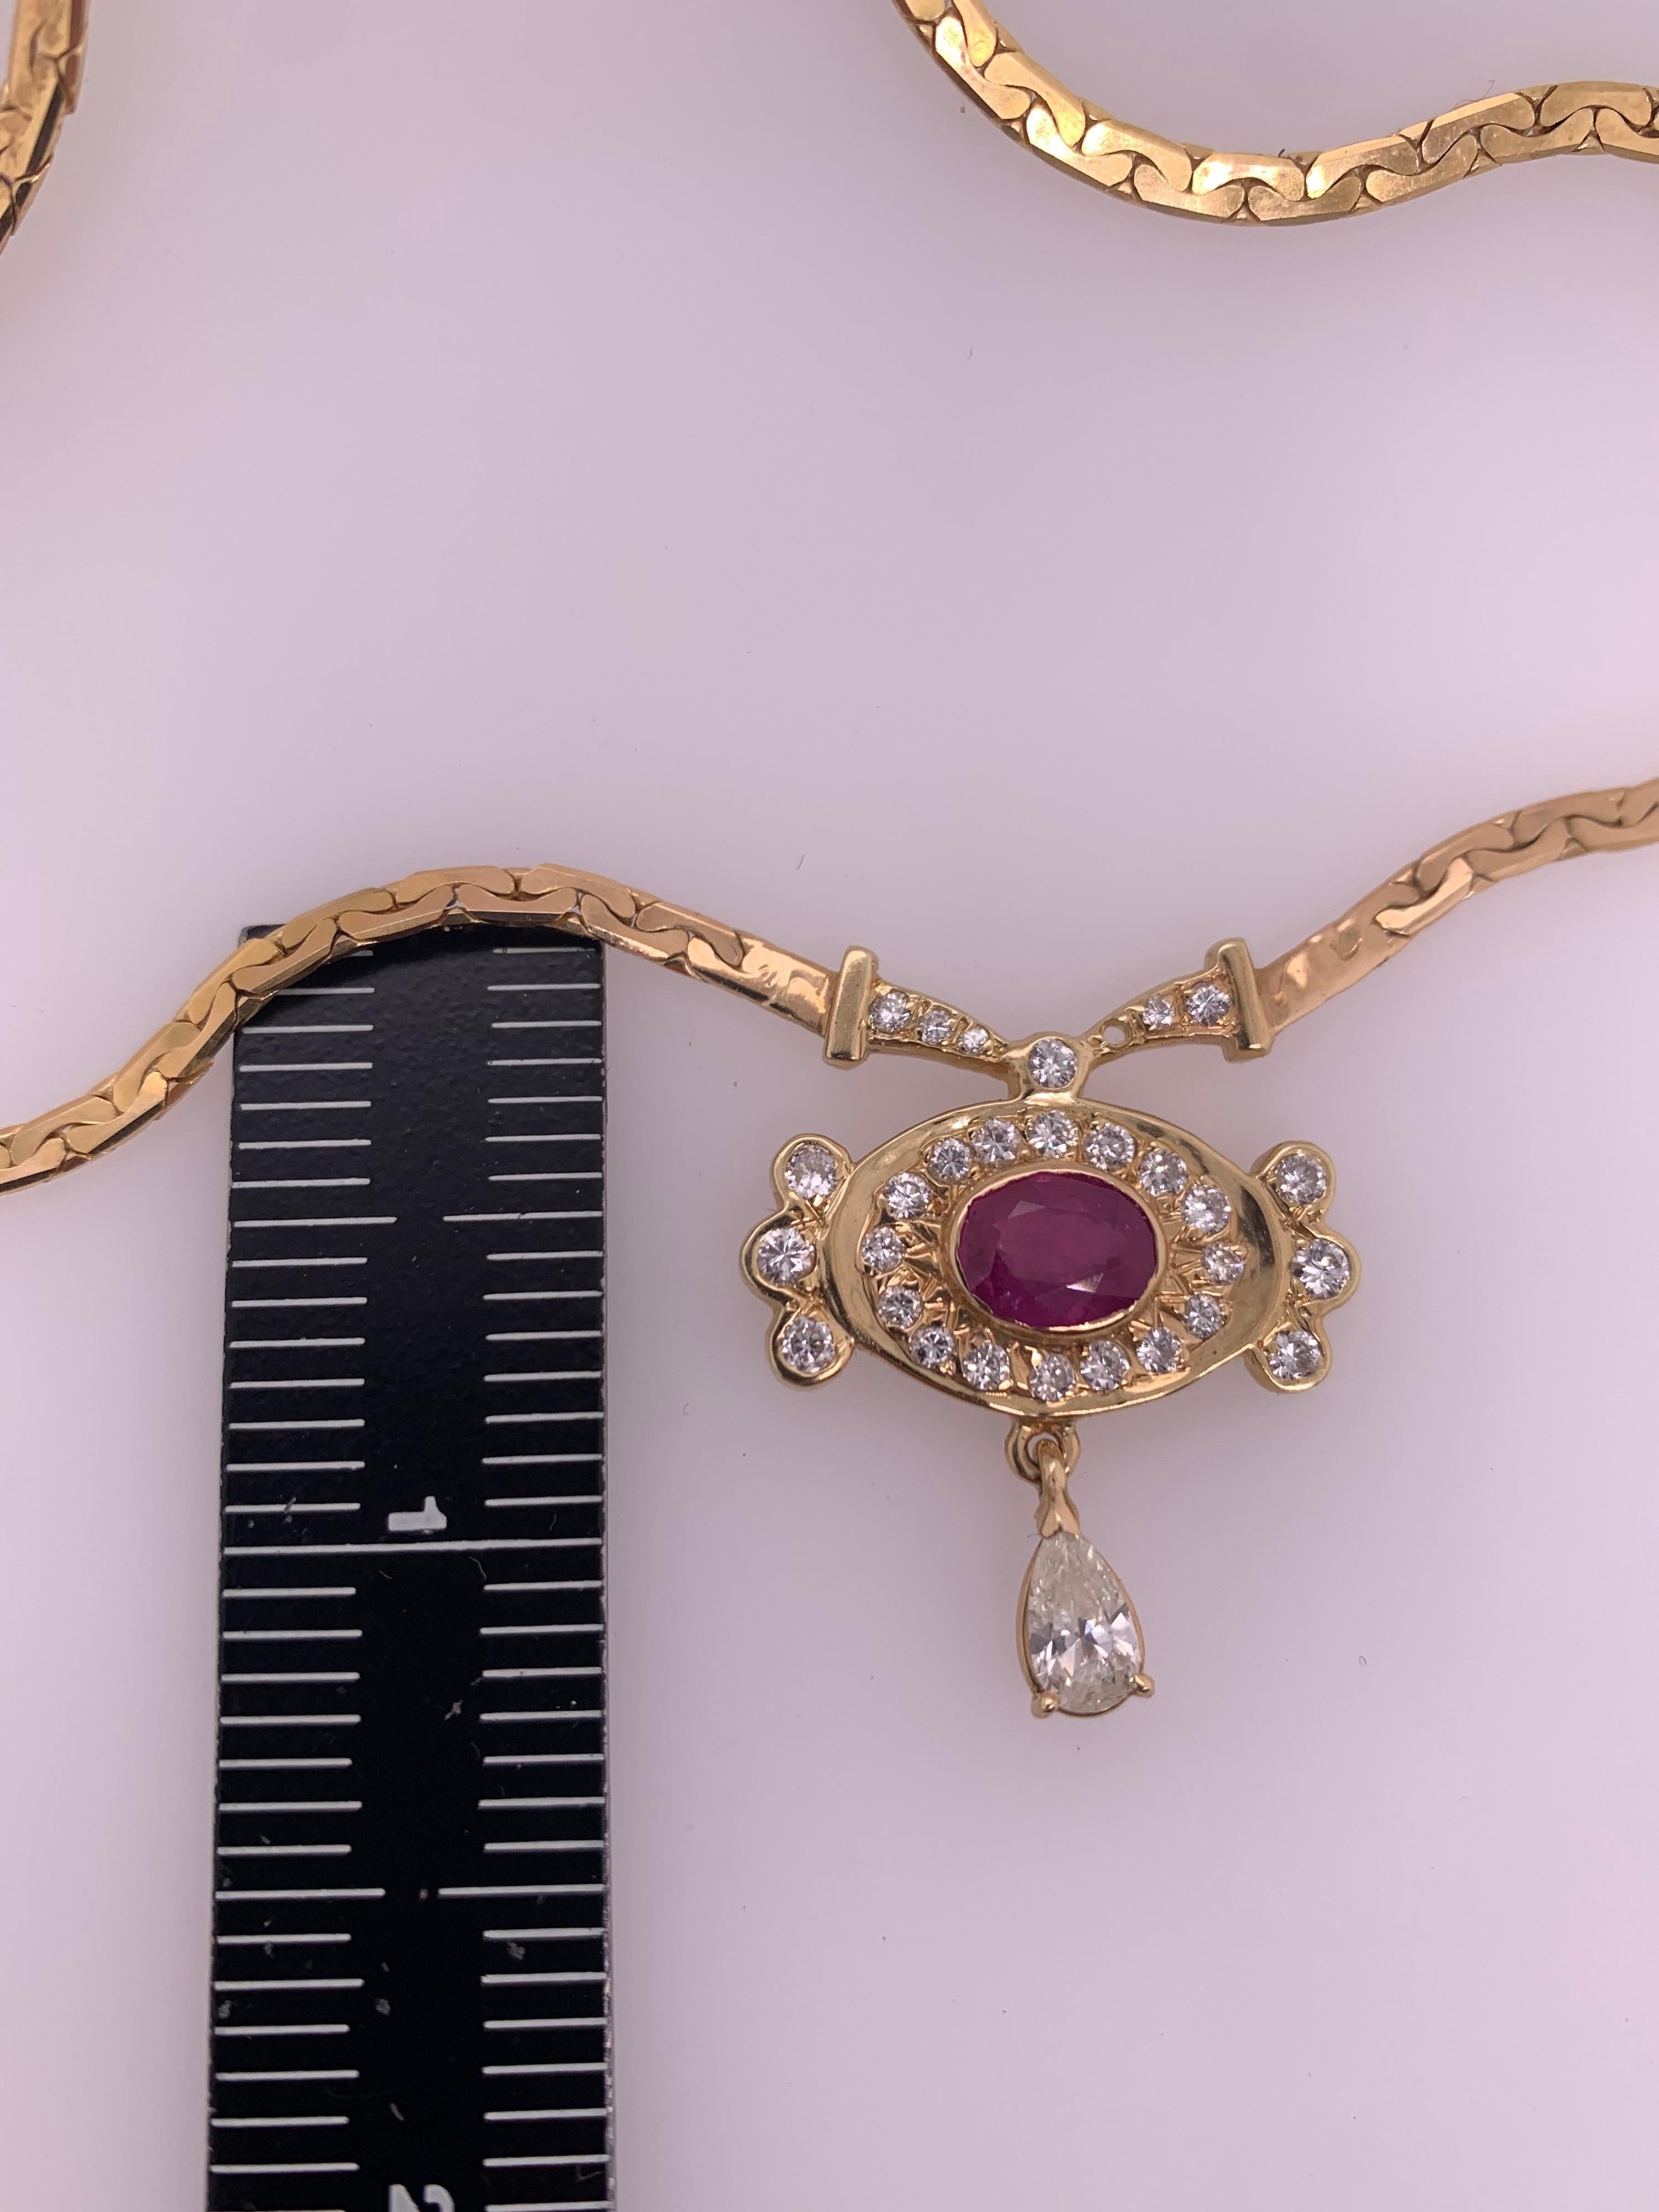 Retro Gold Necklace 3.25 Carat Total Natural Ruby & Diamond Gem Stone circa 1960 For Sale 1